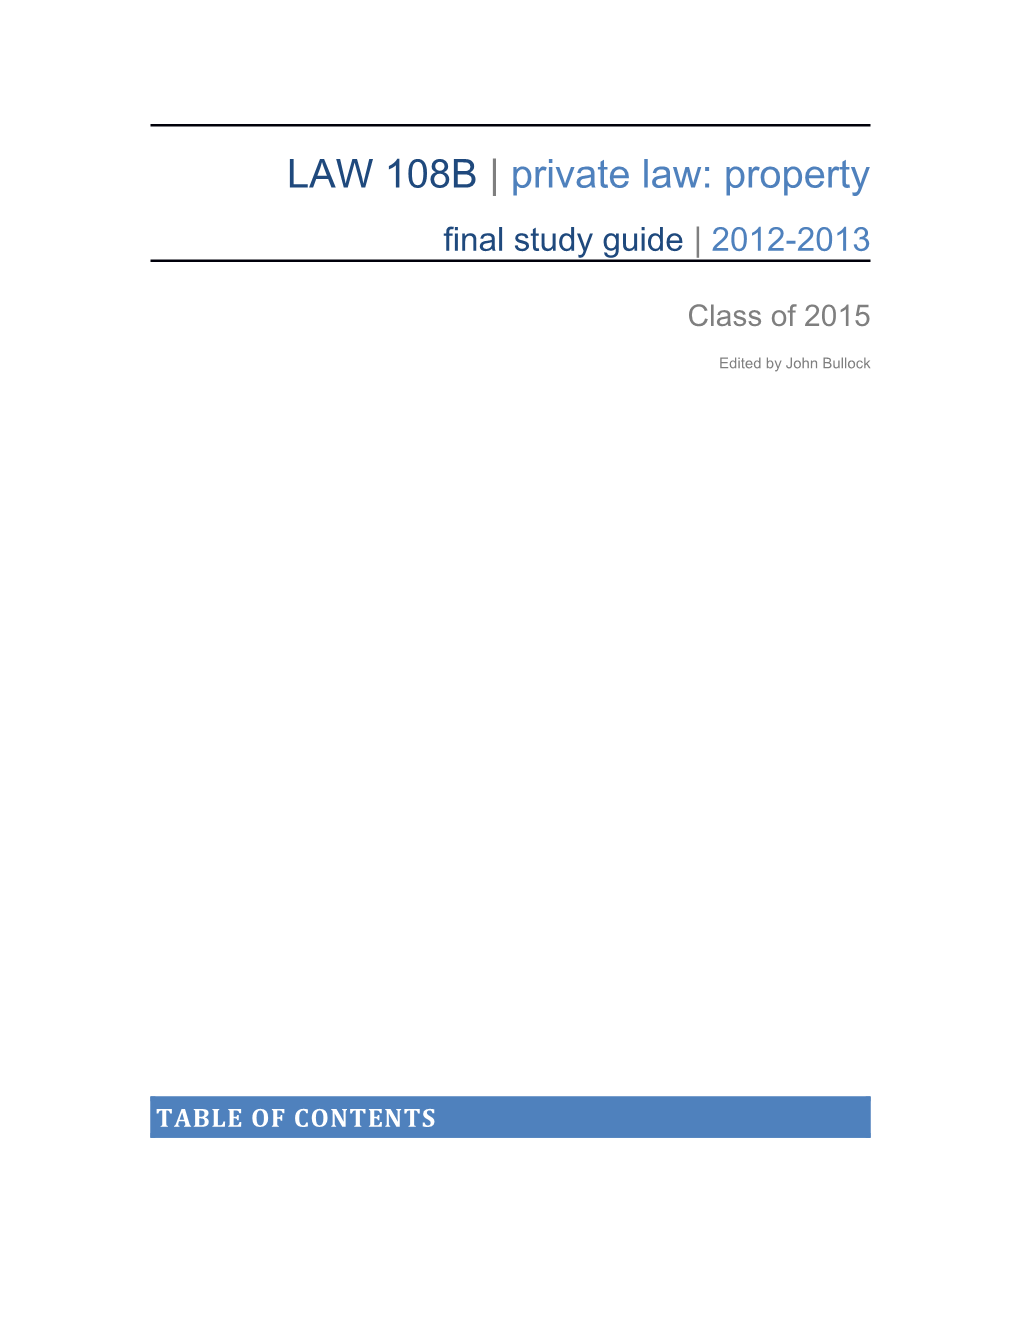 LAW 108B Private Law: Property